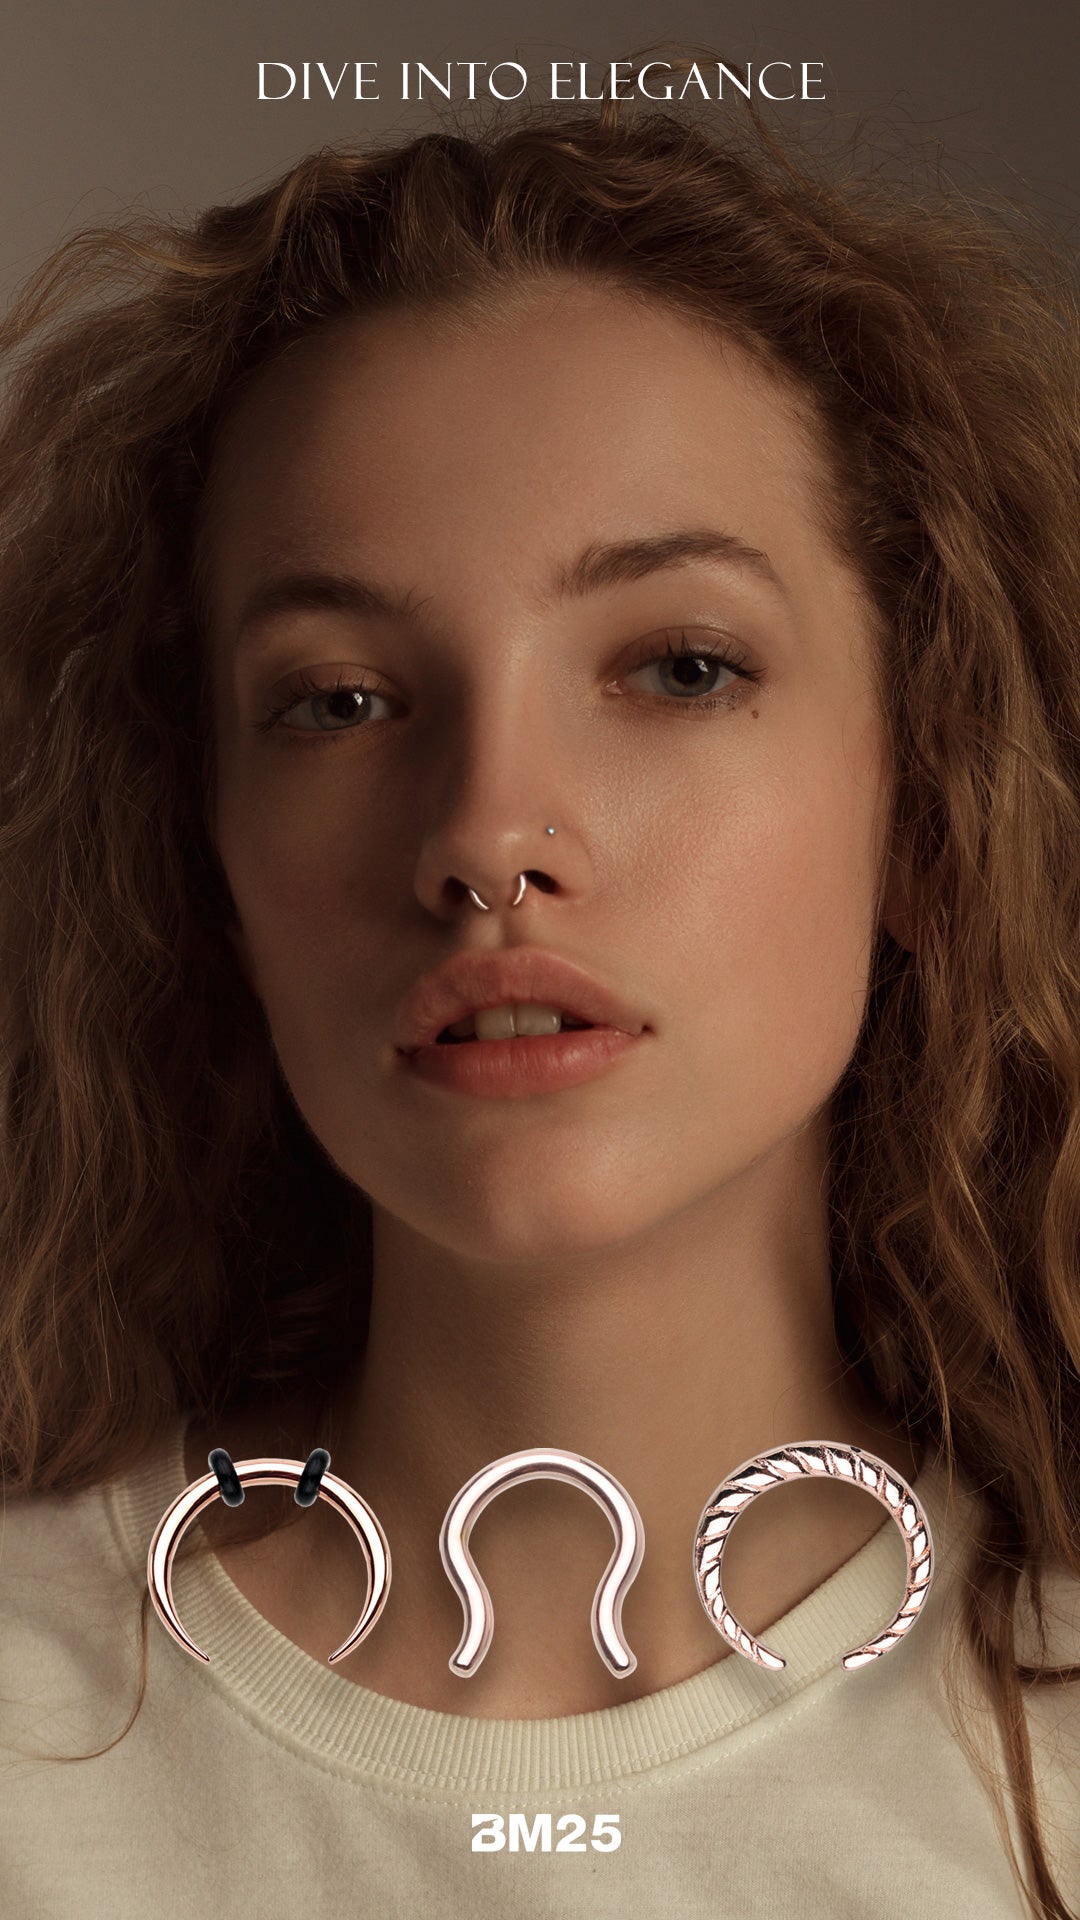 Young woman wears minimalistic septum piercing body jewelry from bm25.com